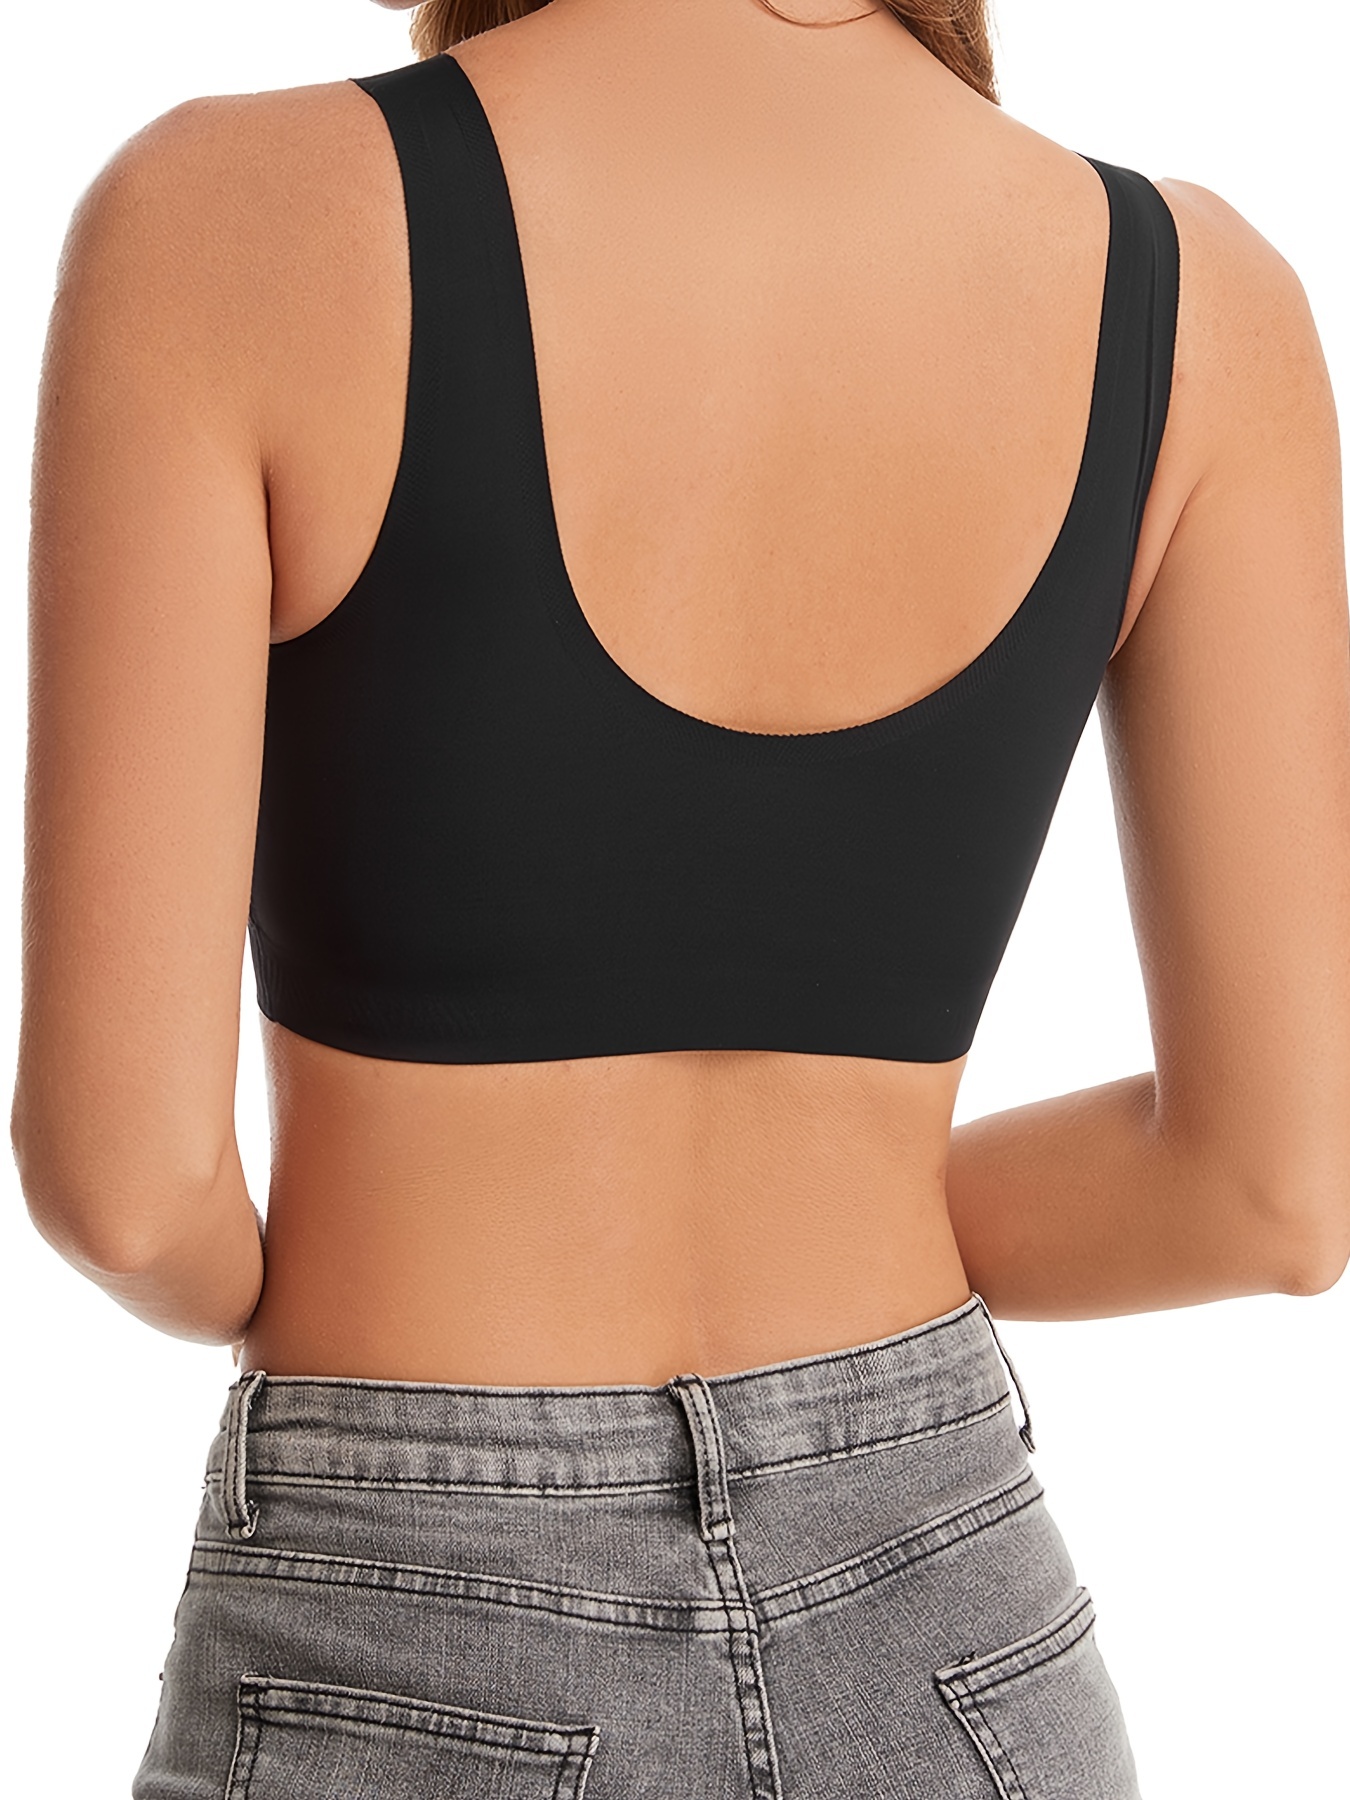 Comfort Wireless Bra Exercise and Offers Back Support Anti Sagging